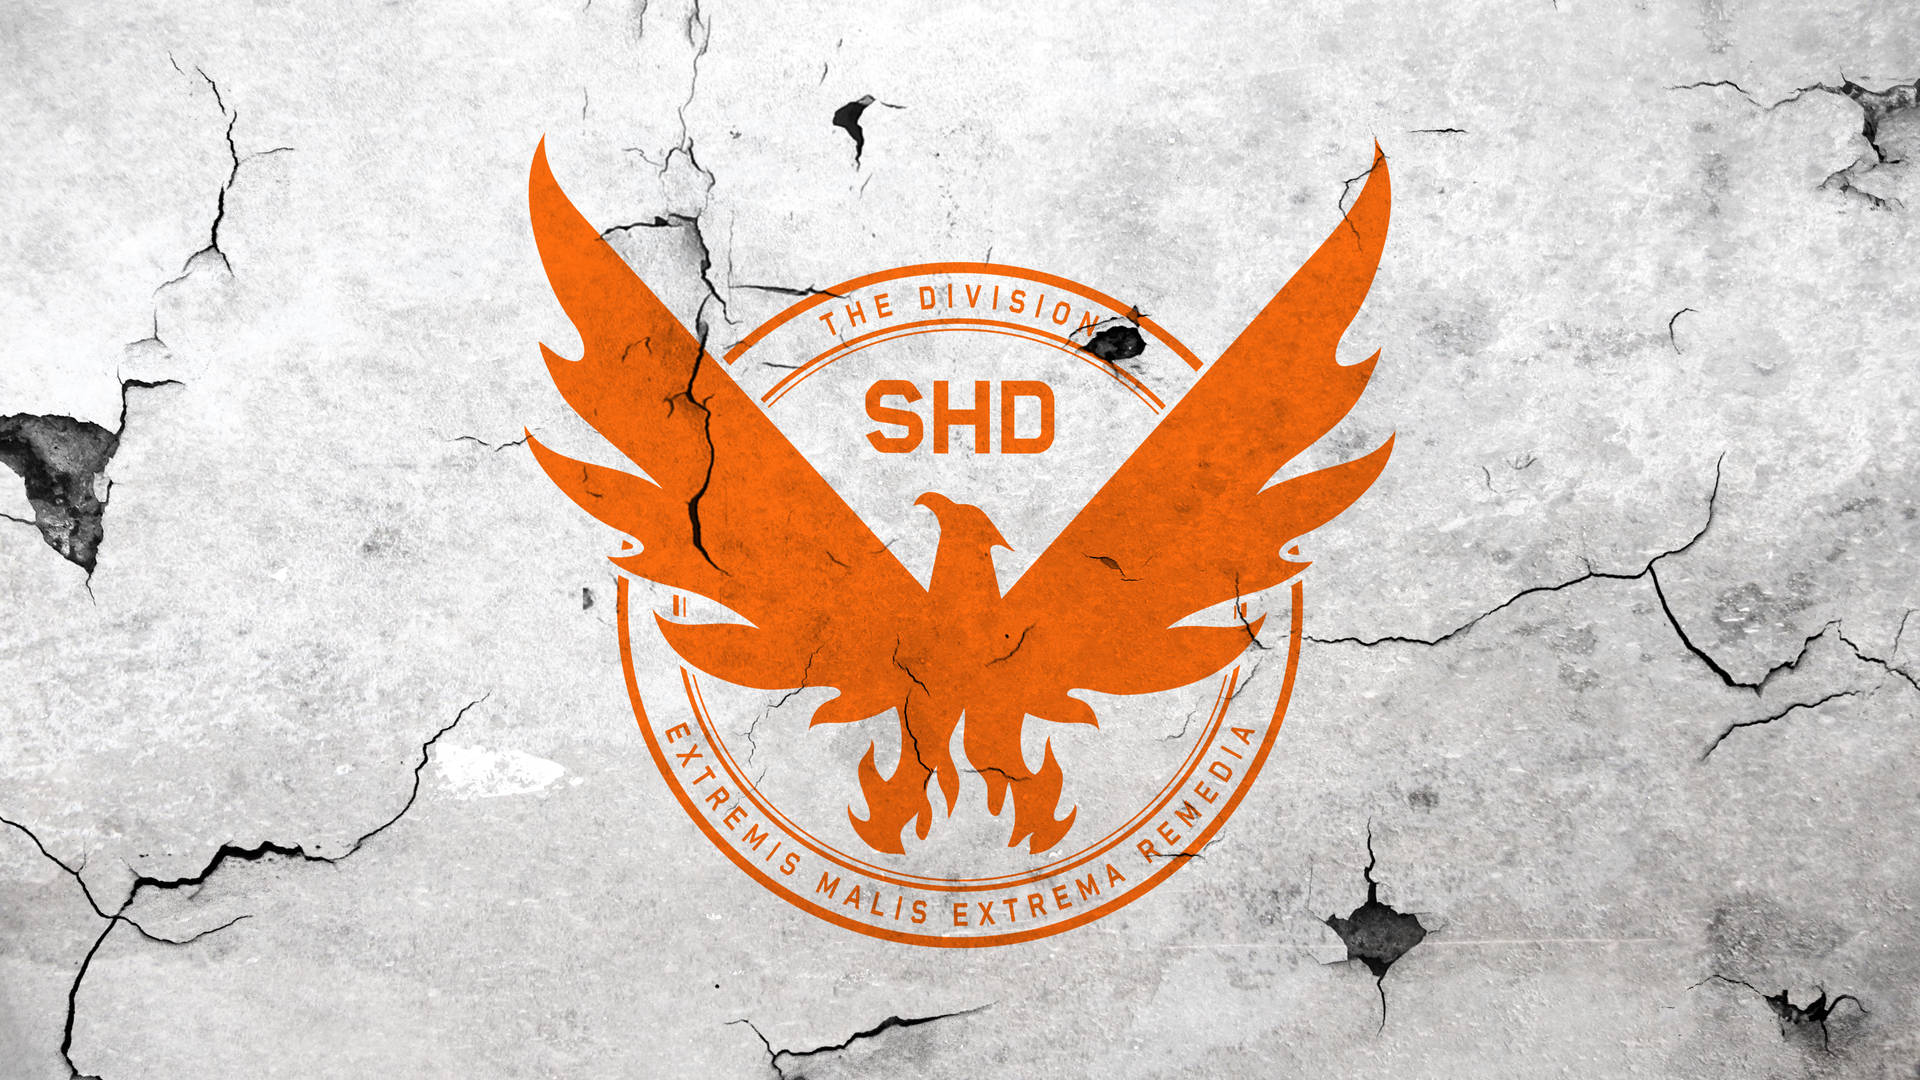 Download The Division 2 Logo Wallpaper 